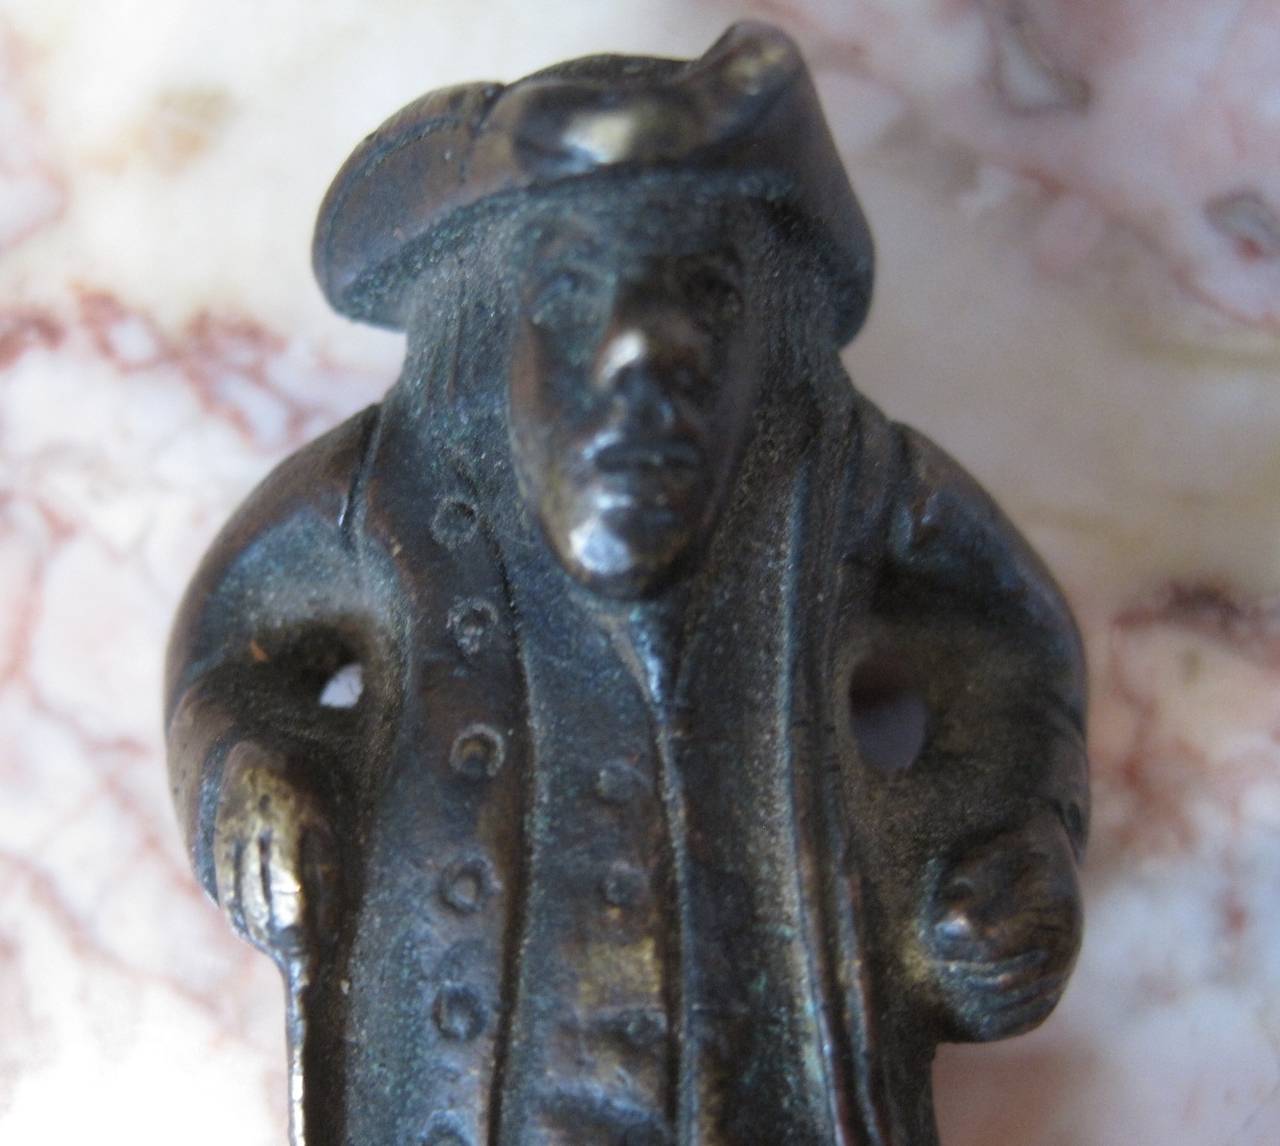 19th century bronze figural novelty wax stamp.

Shipping within the United States and Canada is free.